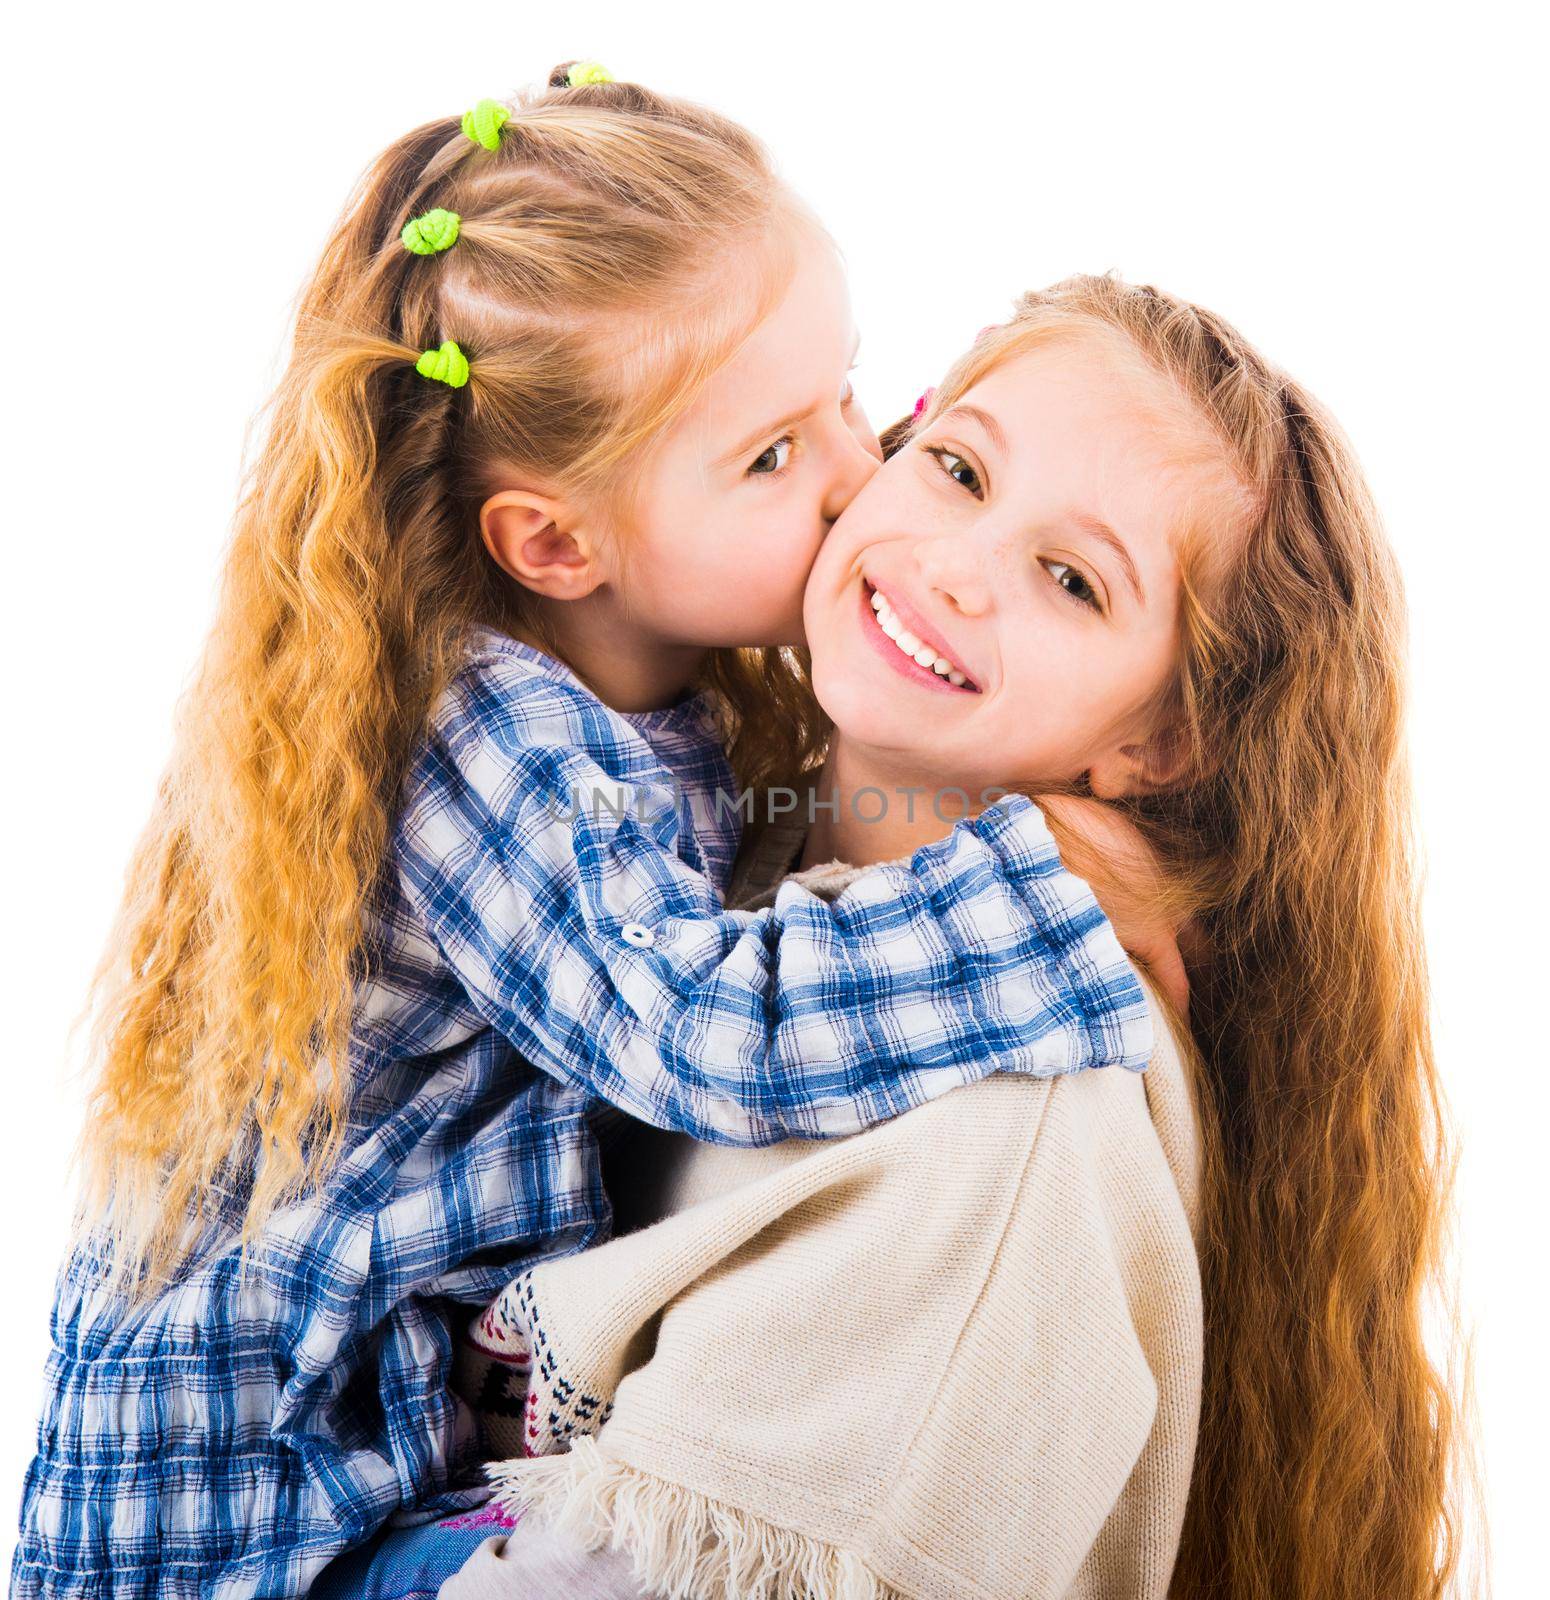 Cute little girl hugging and kissing her older sister, isolated on a white background